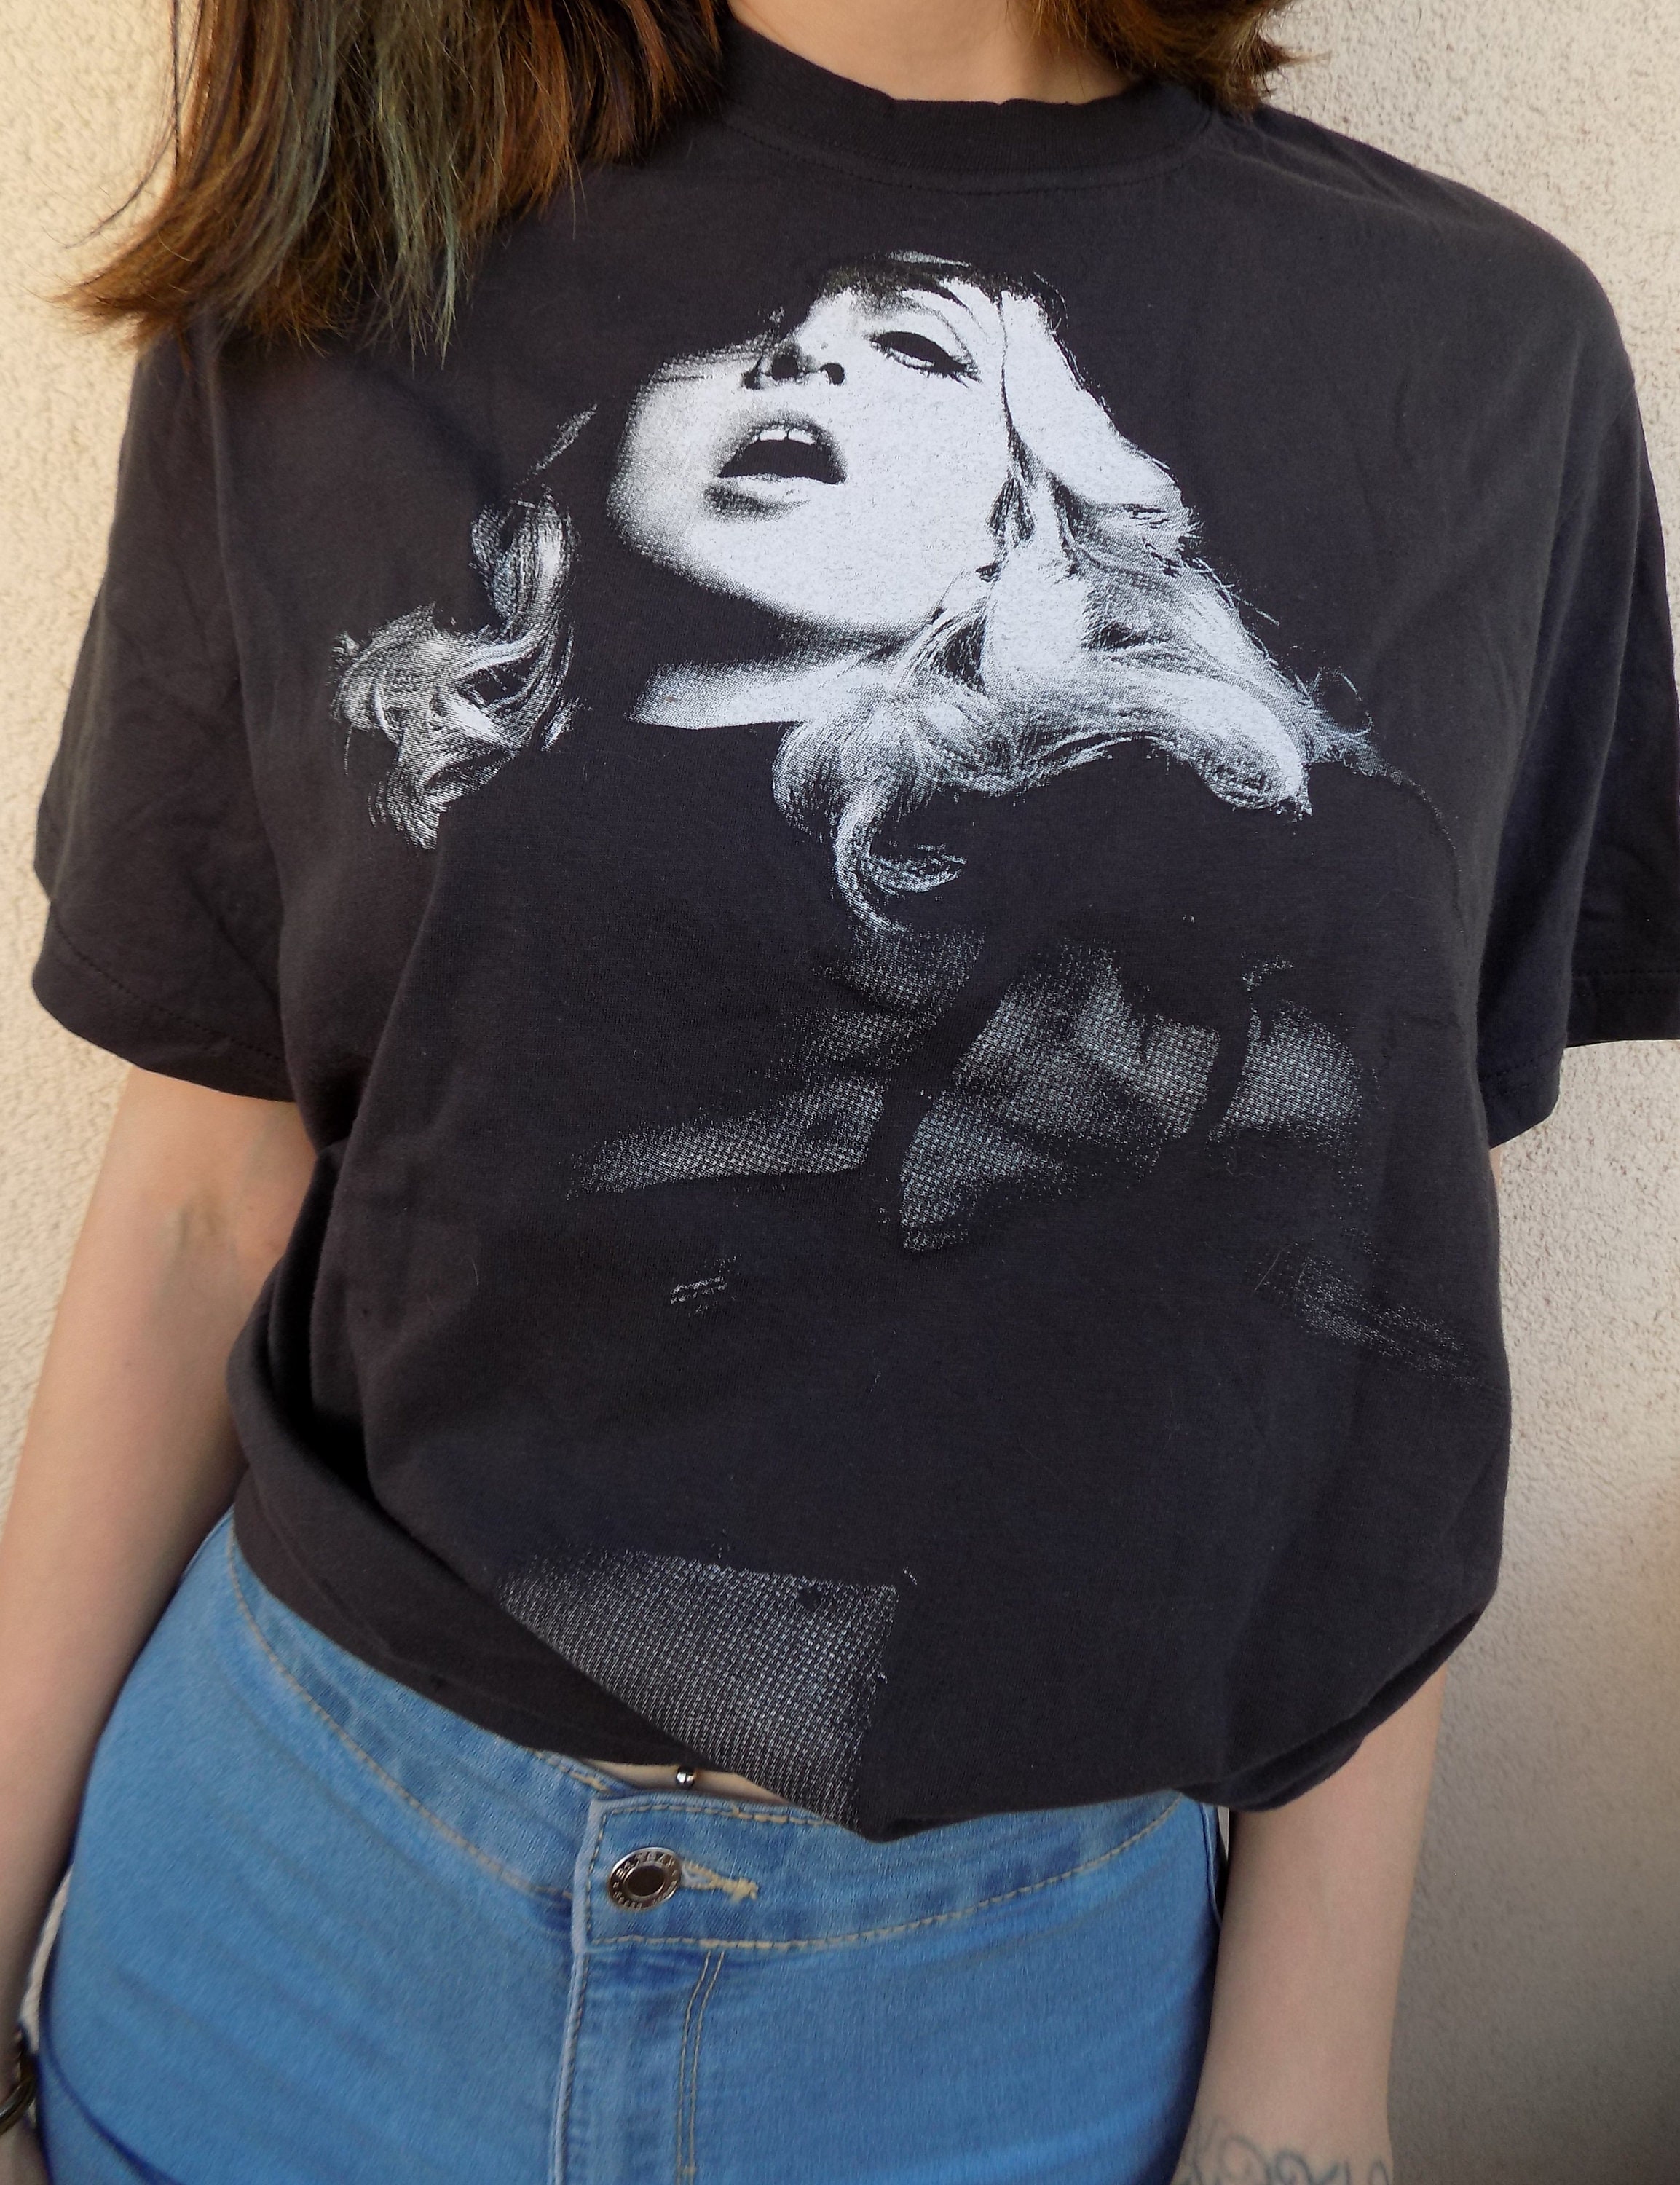 Madonna's Tour Two-Sided Shirt